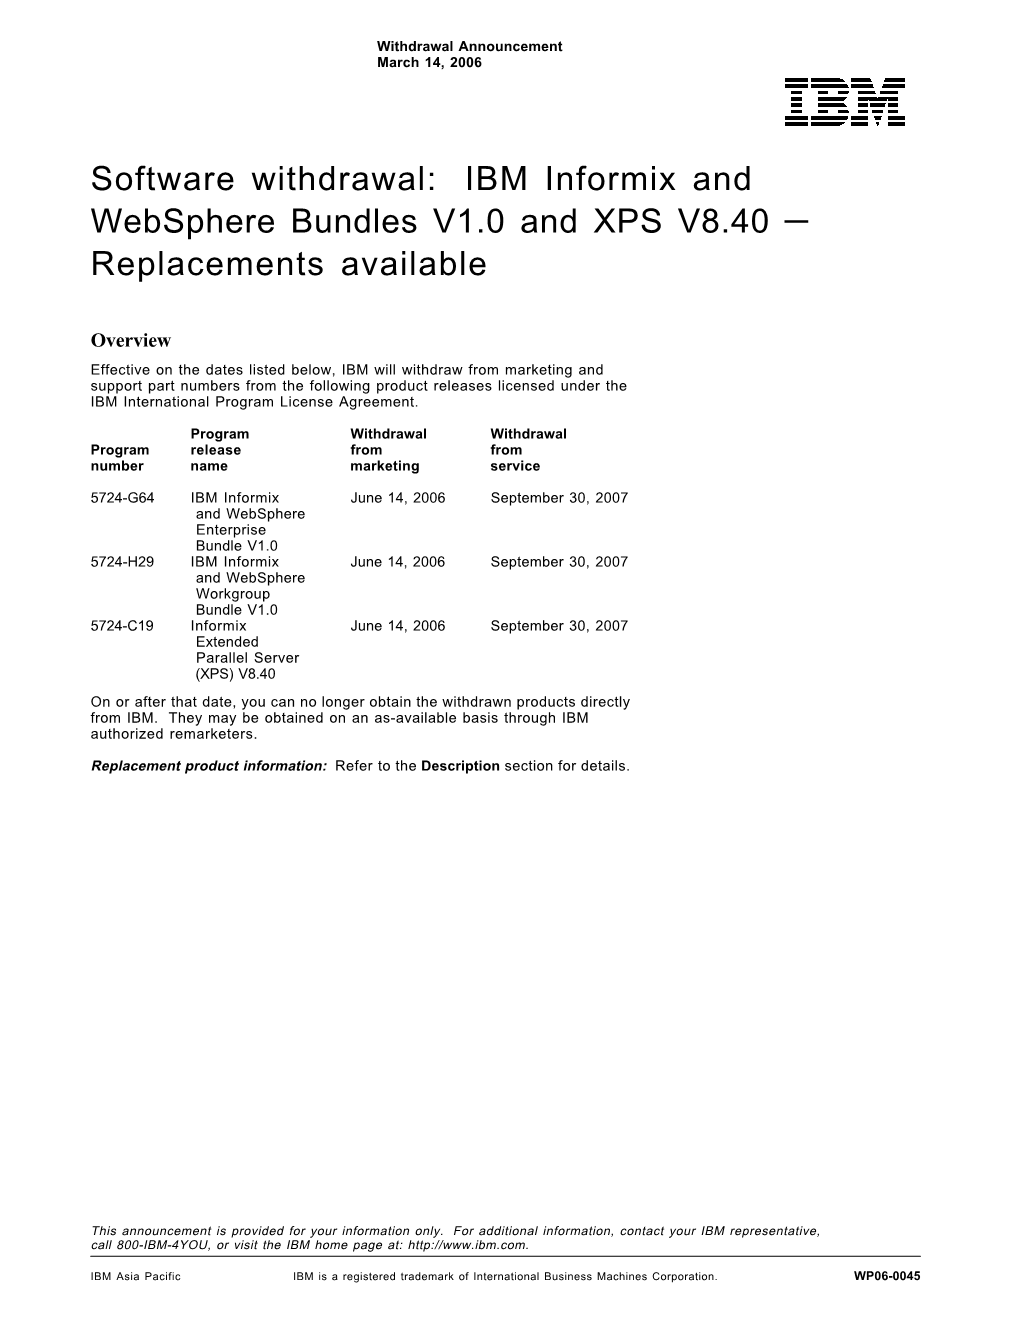 IBM Informix and Websphere Bundles V1.0 and XPS V8.40 — Replacements Available